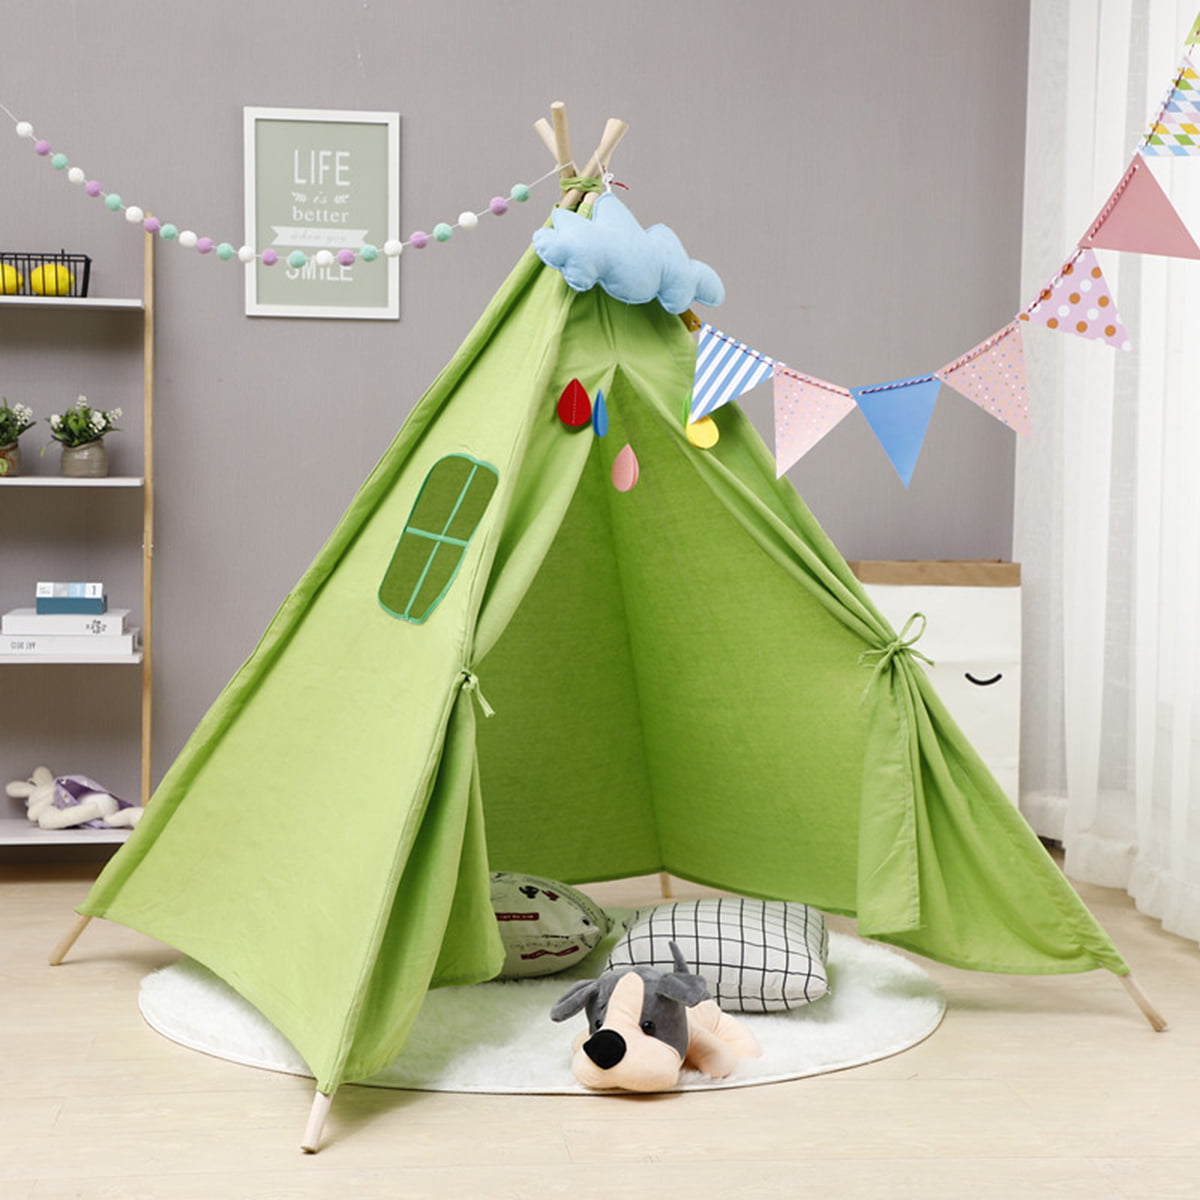 Portable Large Teepee Tent Kids Playhouse Sleeping Dome Children Play House 